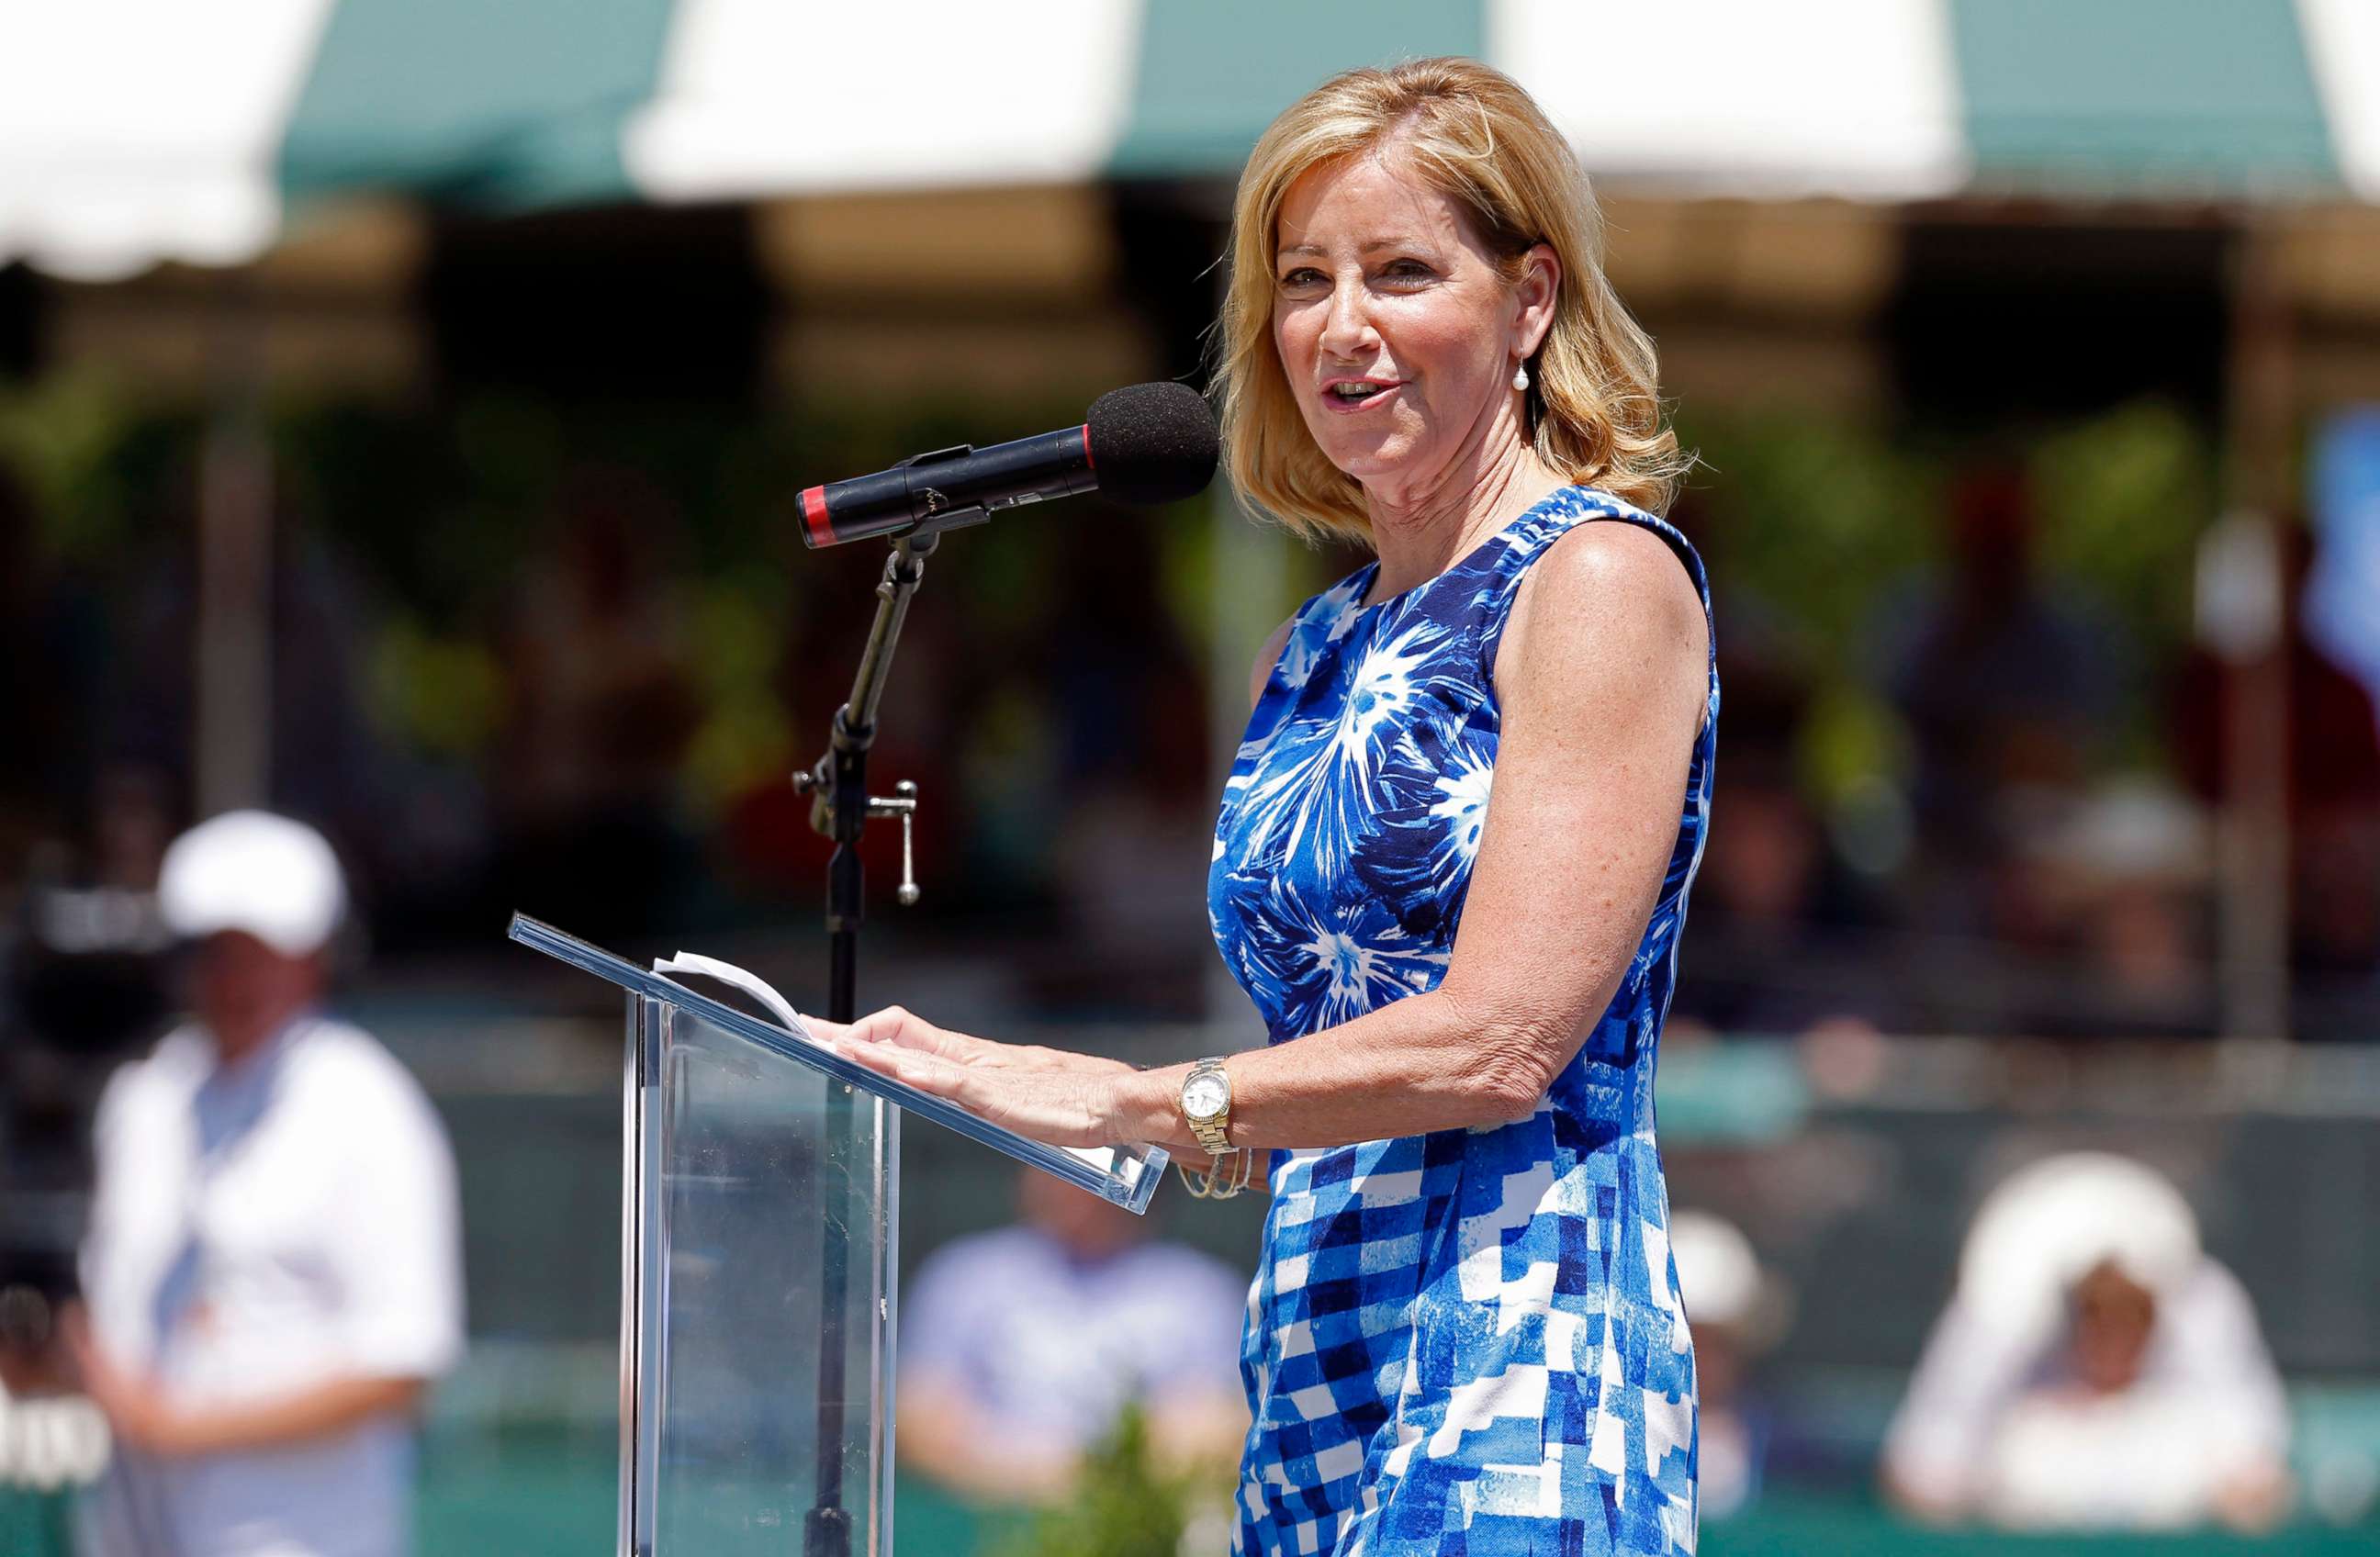 PHOTO: Chris Evert speaks during the induction ceremony at the International Tennis Hall of Fame in Newport, R.I., July 12, 2014.